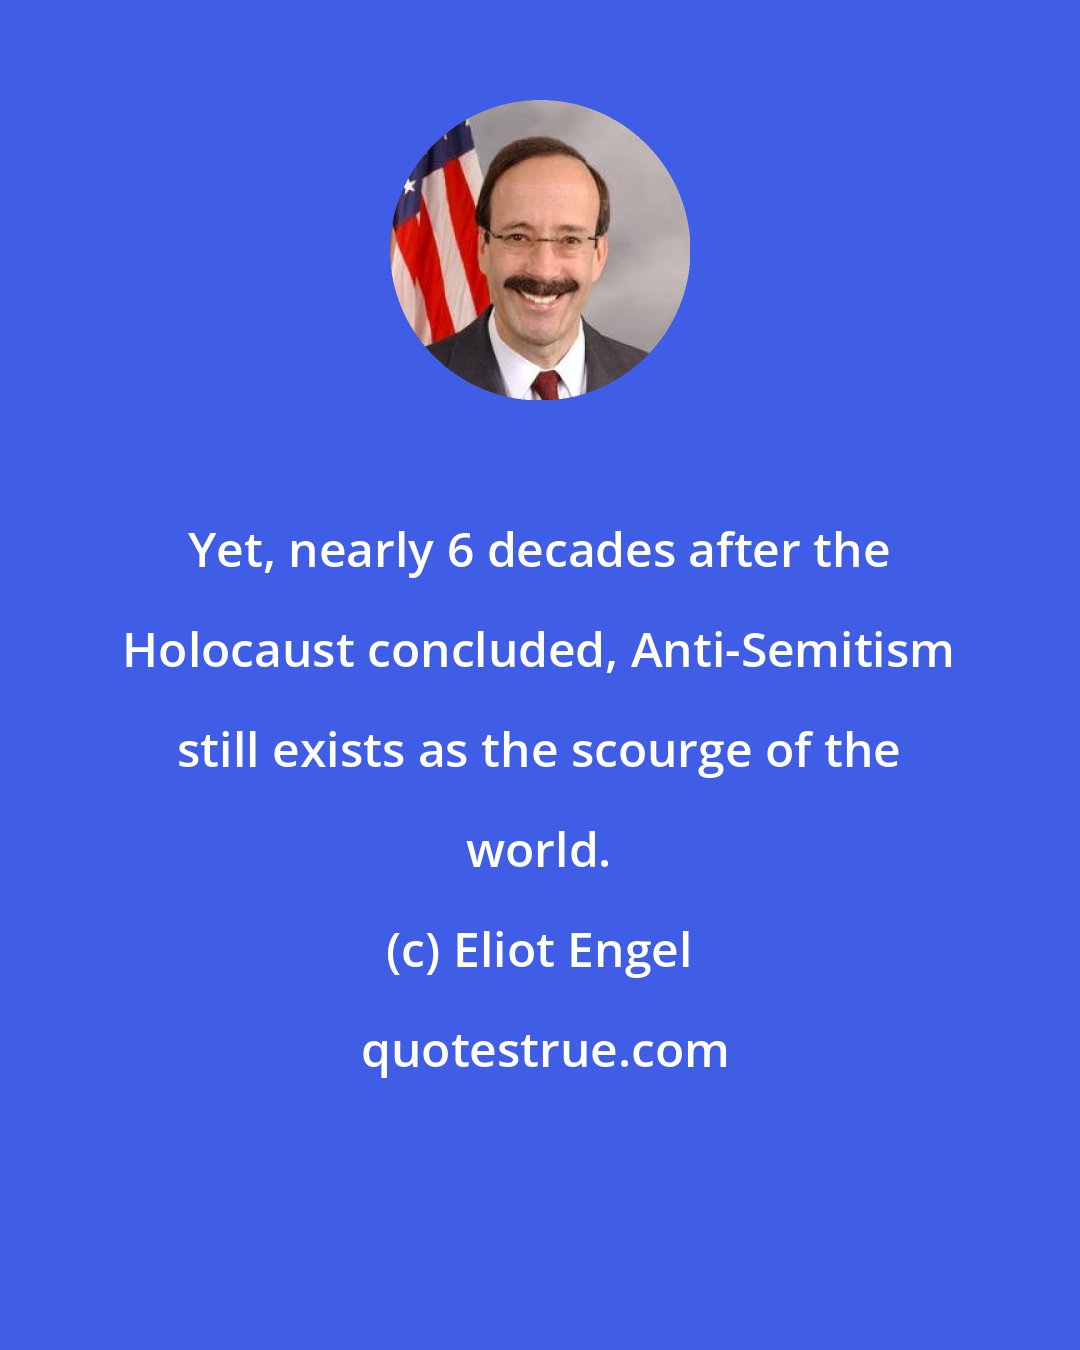 Eliot Engel: Yet, nearly 6 decades after the Holocaust concluded, Anti-Semitism still exists as the scourge of the world.